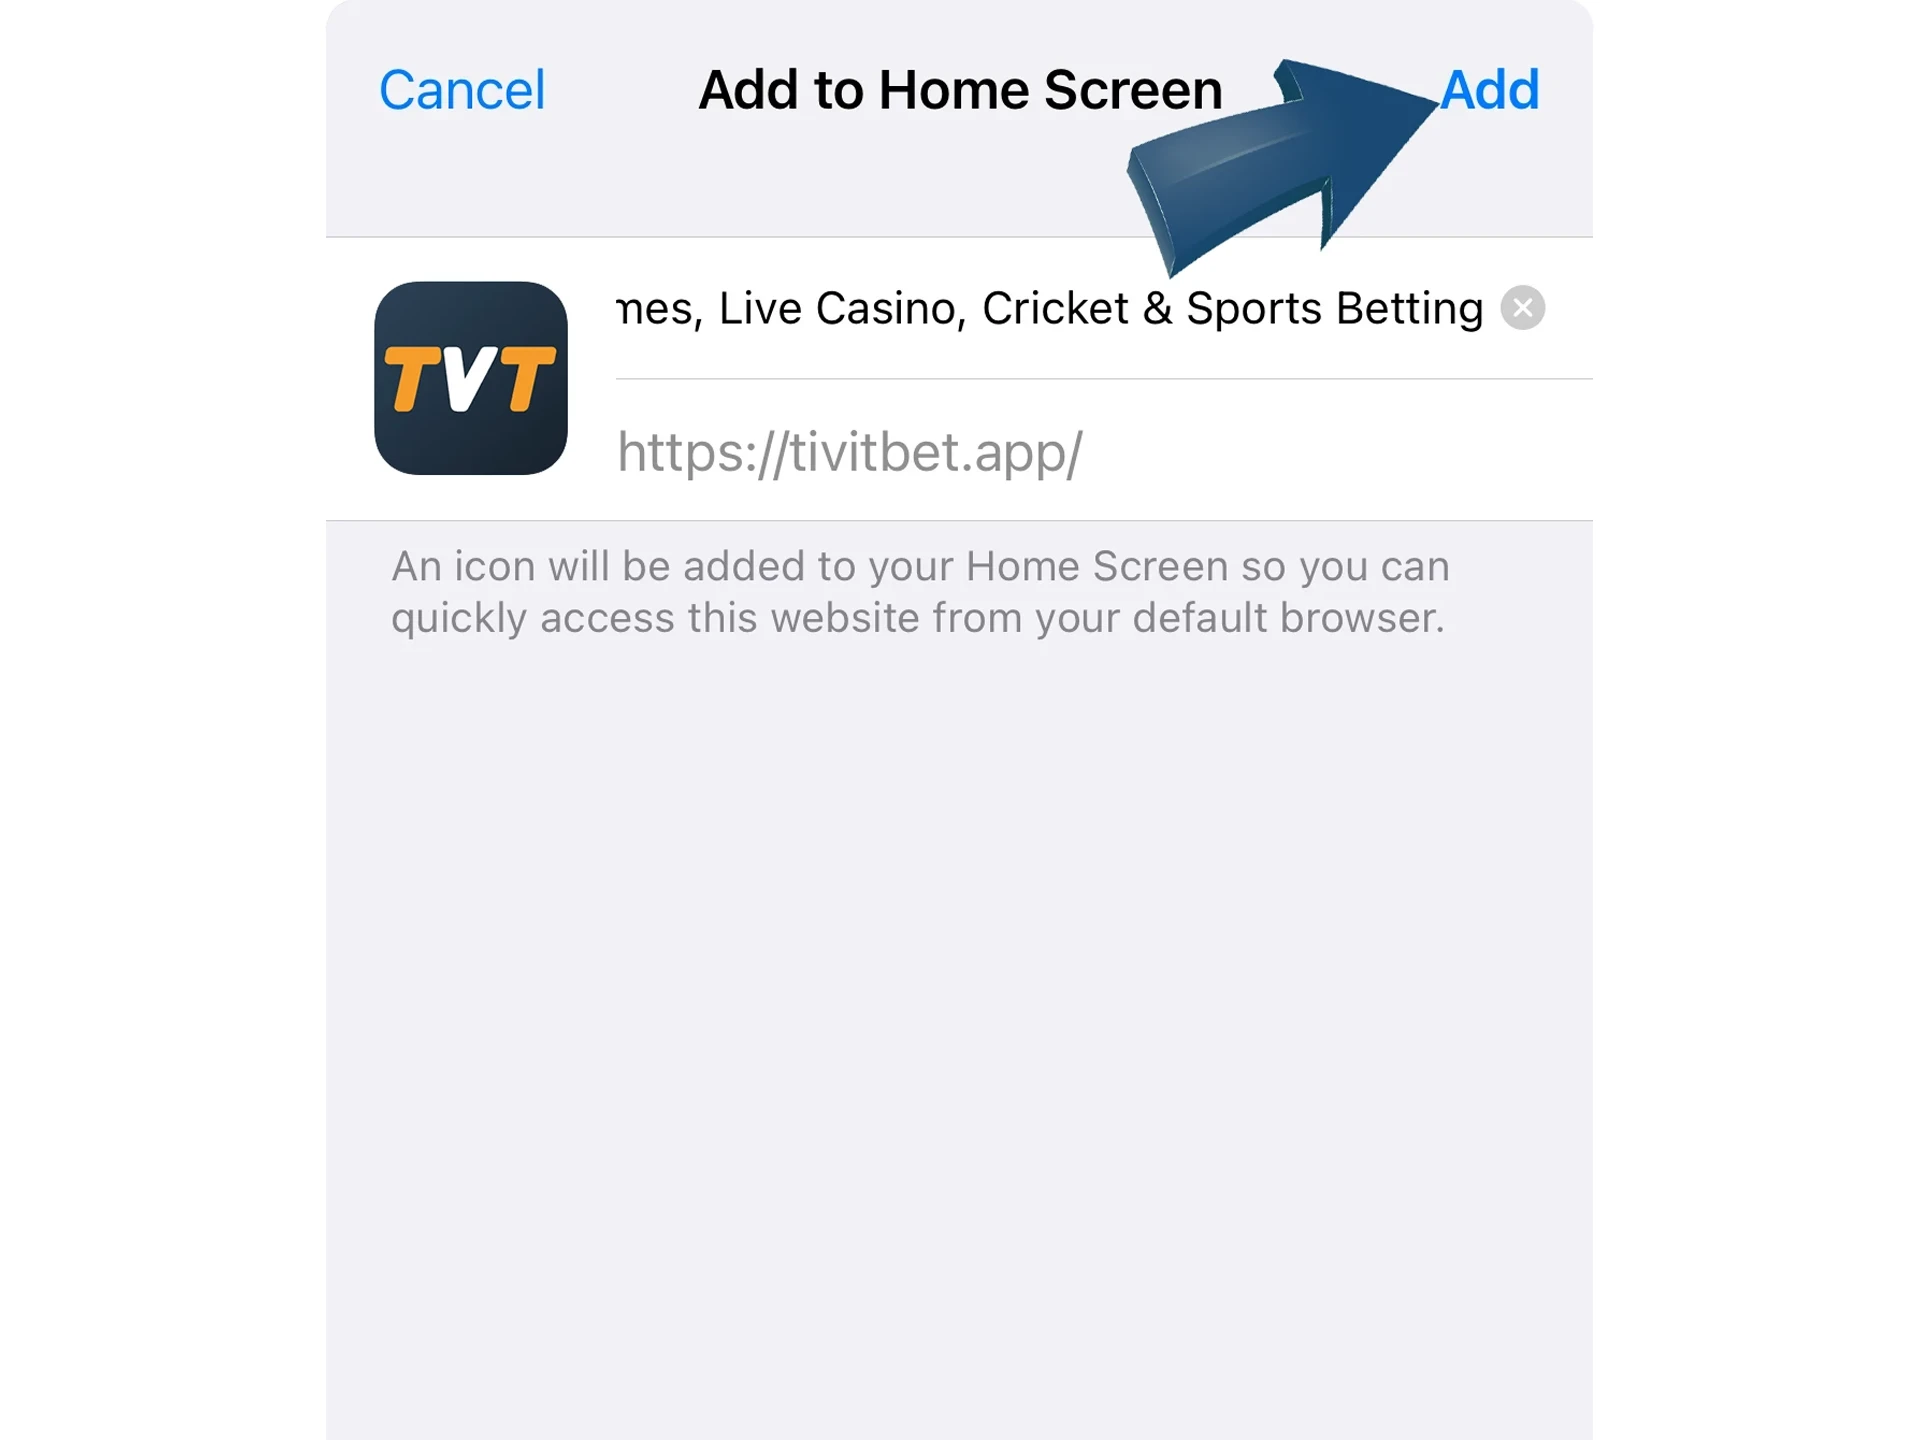 To finish installing Tivitbet, click on the "Add" button.